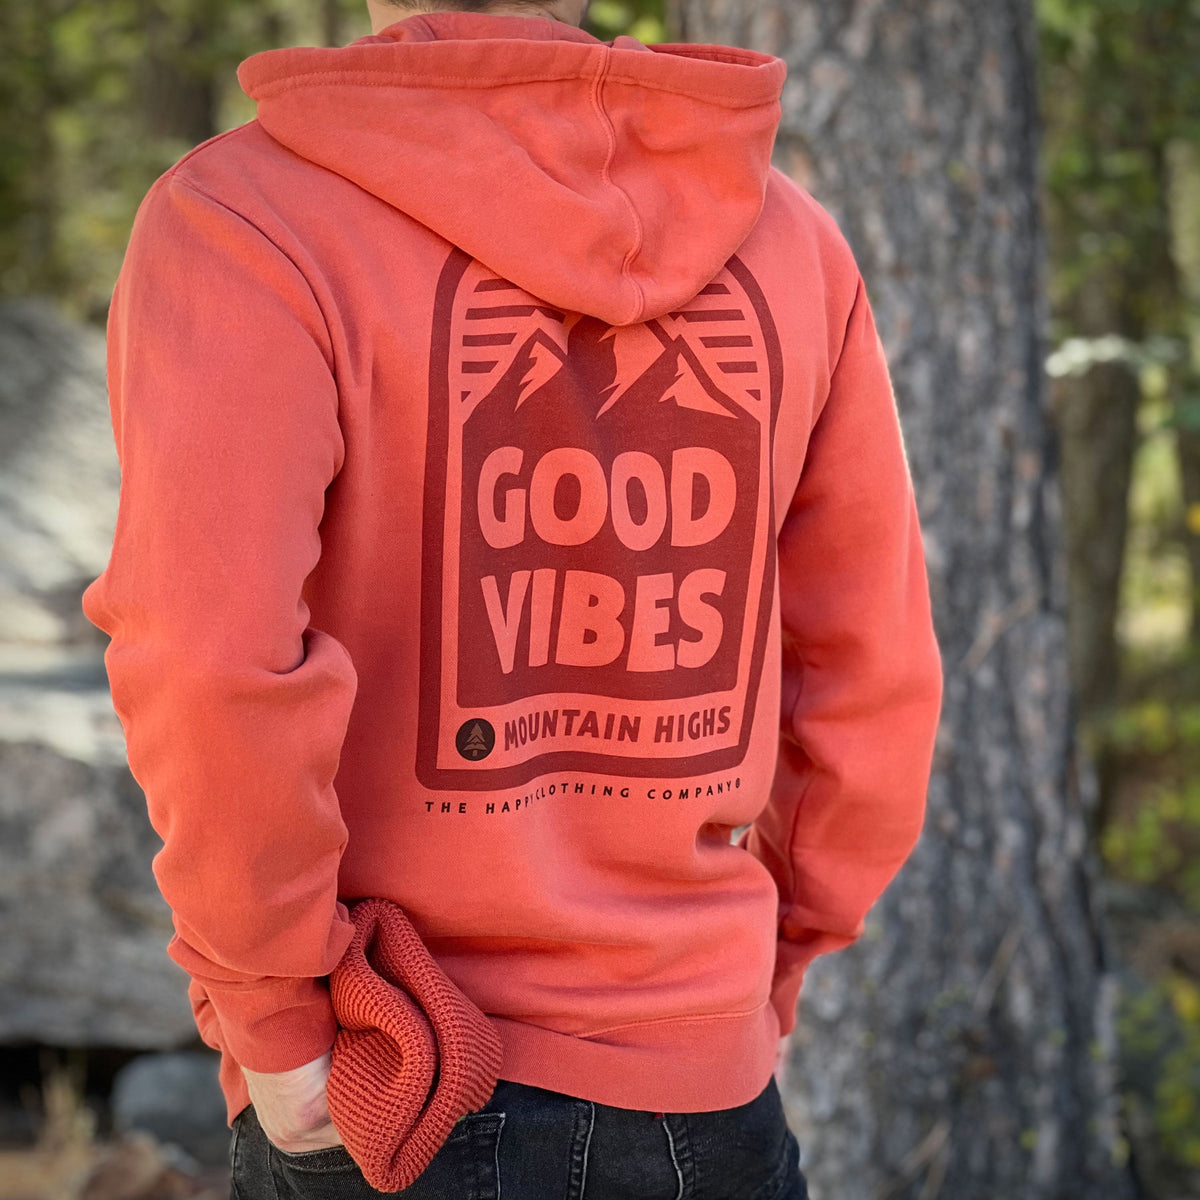 Good Vibes &amp; Mountain Highs Nature-Dyed Unisex Hoodie